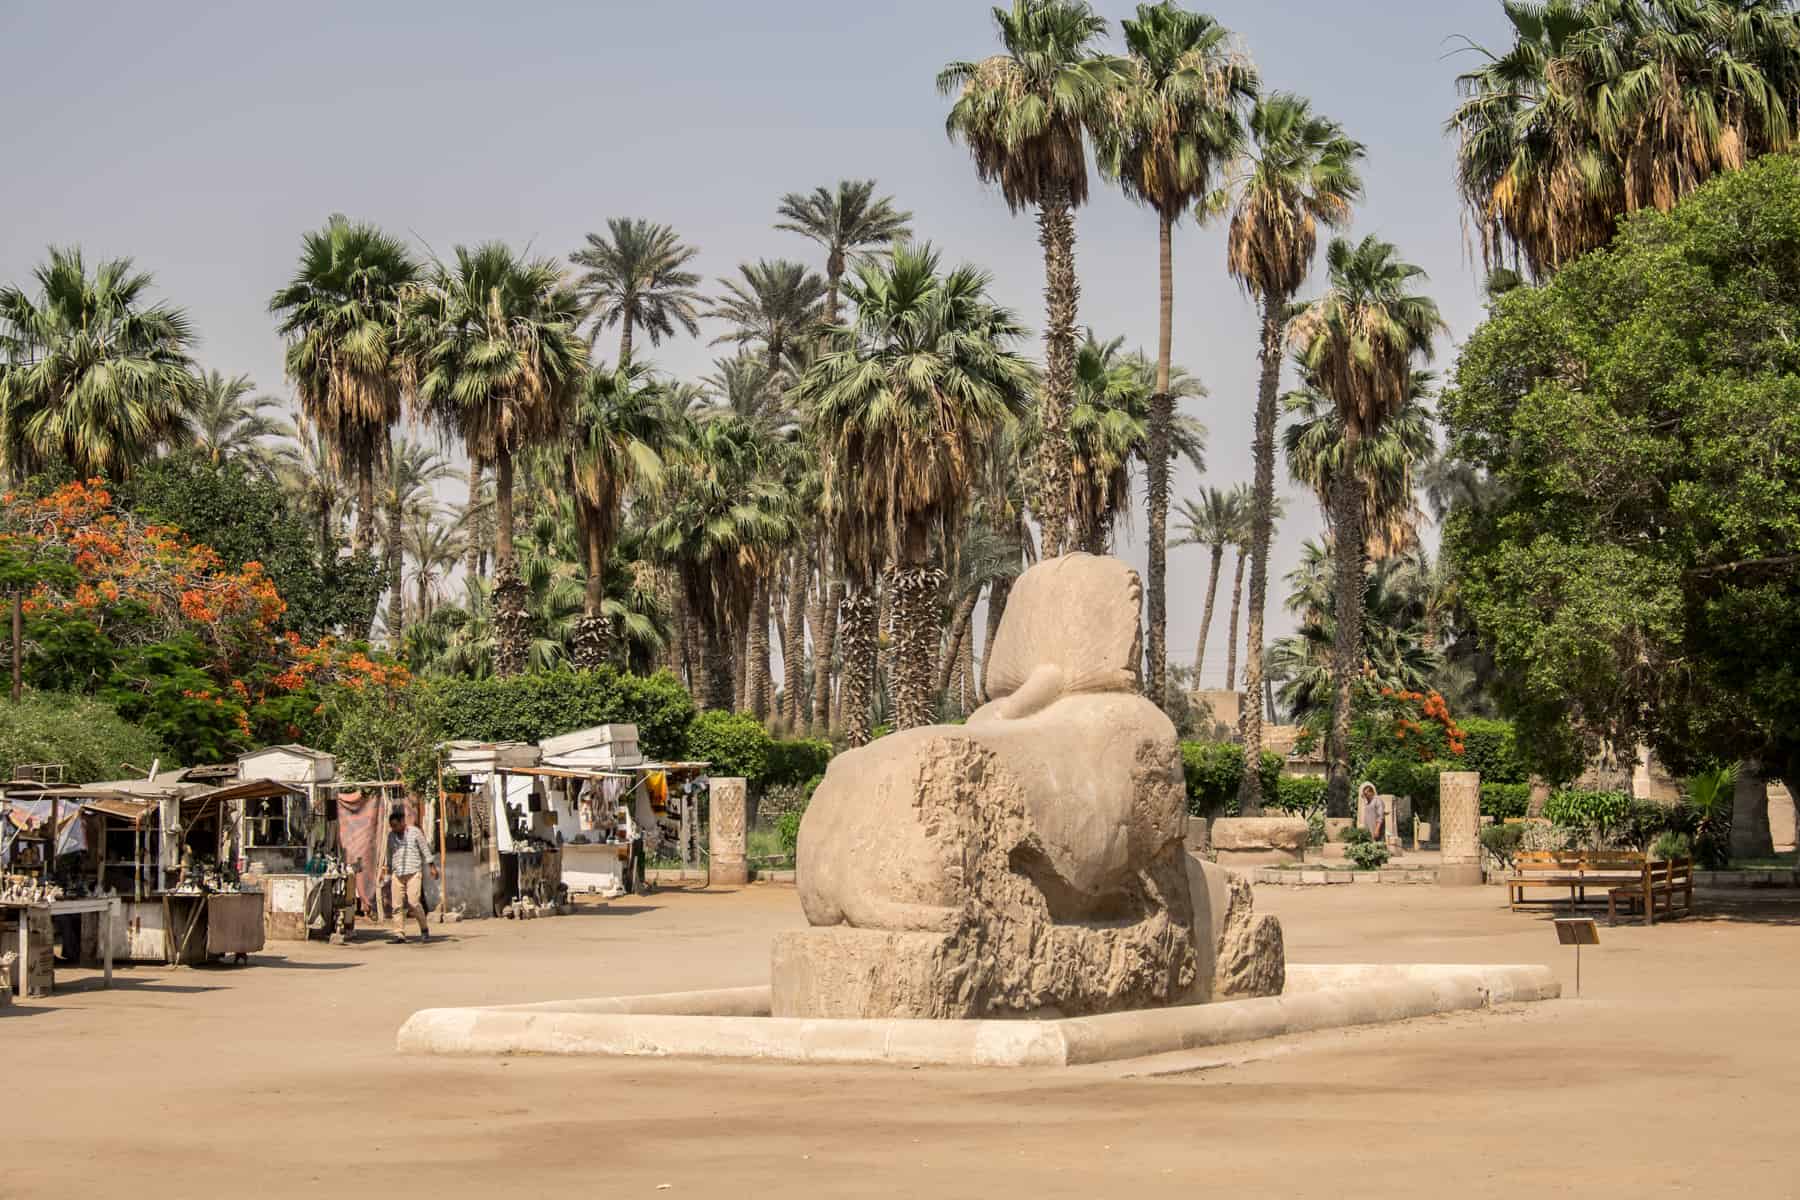 A small sphinx sits in the middle of the desert ground that makes up the museum of Memphis in Egypt - one of a few artefacts of Ancient Egypt on show outside